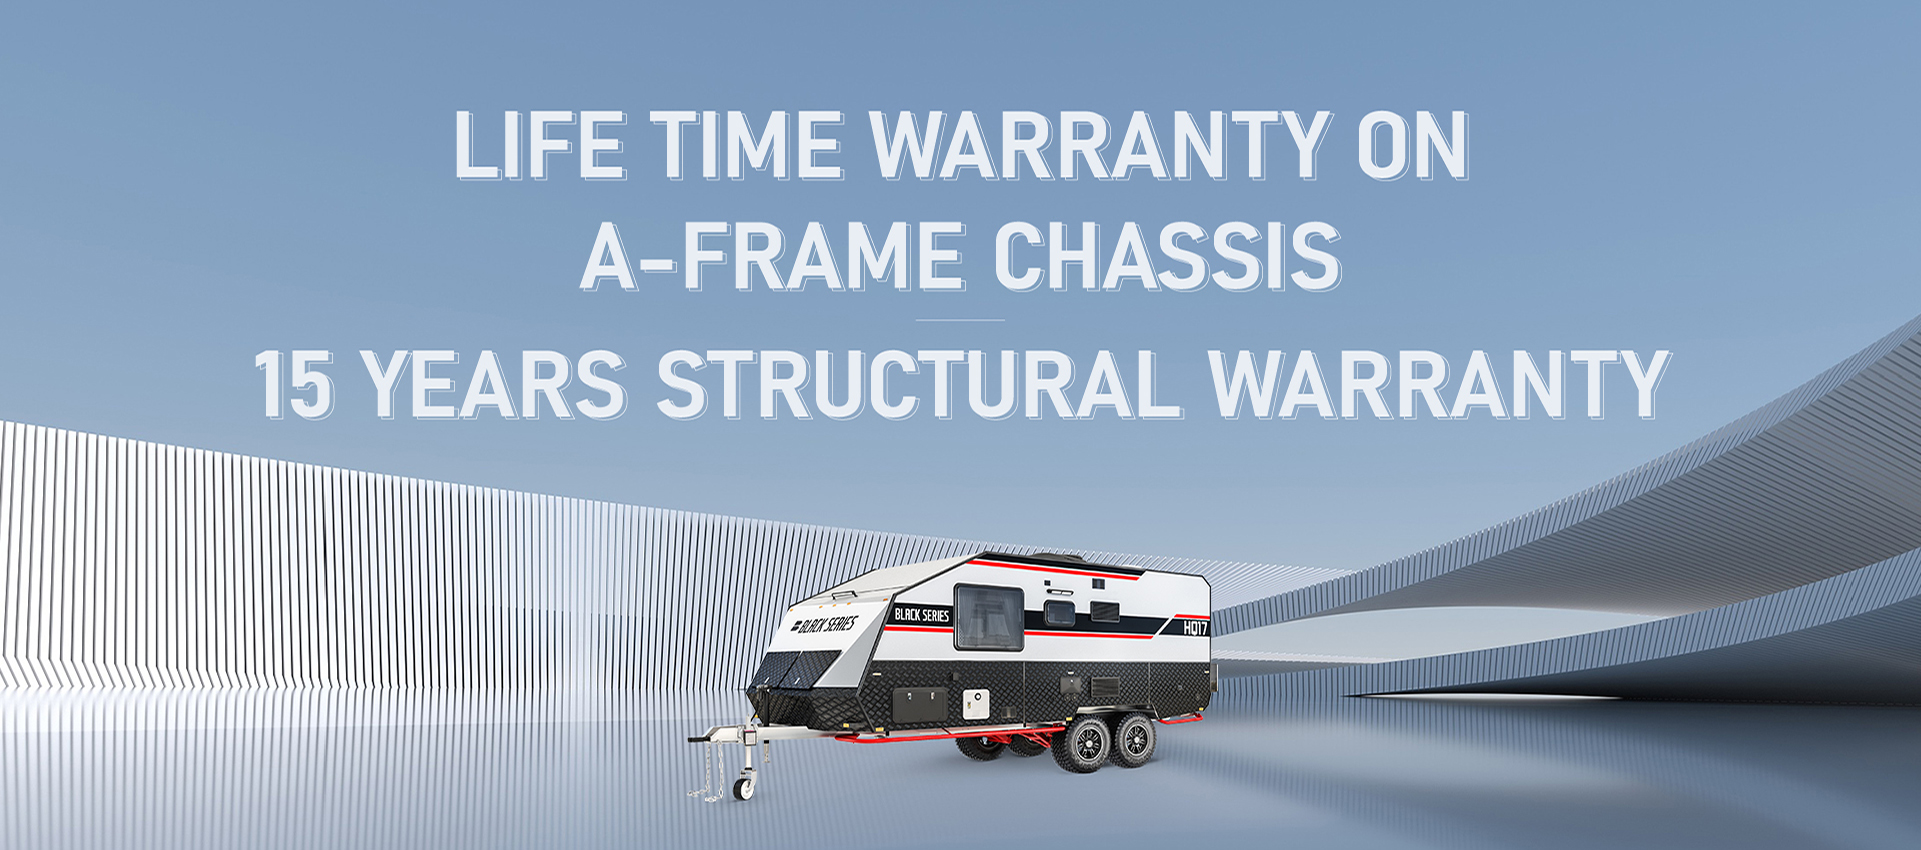 HQ17: Life time warranty on a-frame chassis and 15 years structural warranty